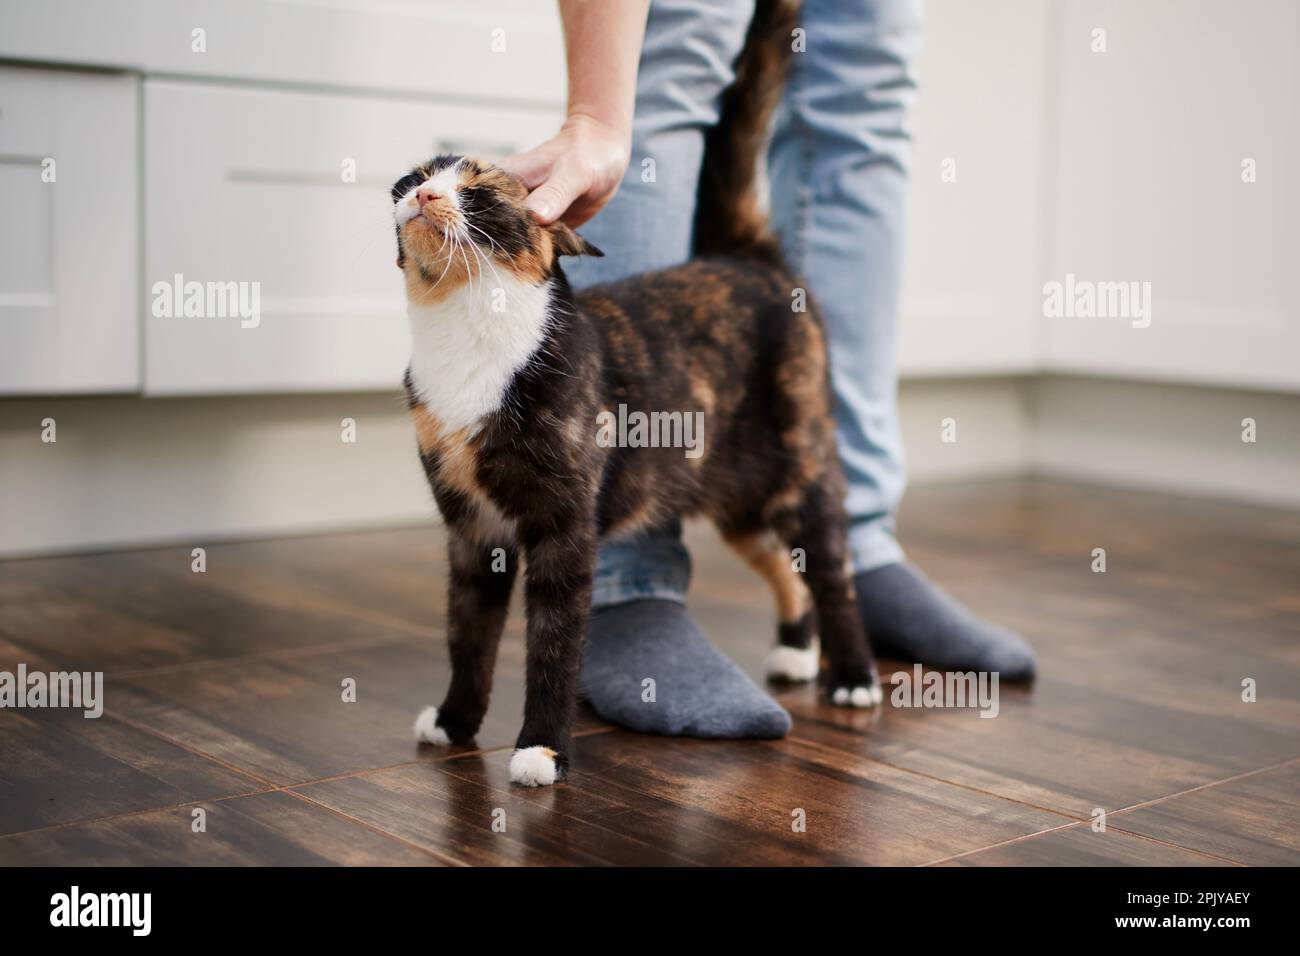 Contented cat greets her pet owner upon his arrival home. Man stroking his cute mottled cat. Stock Photo